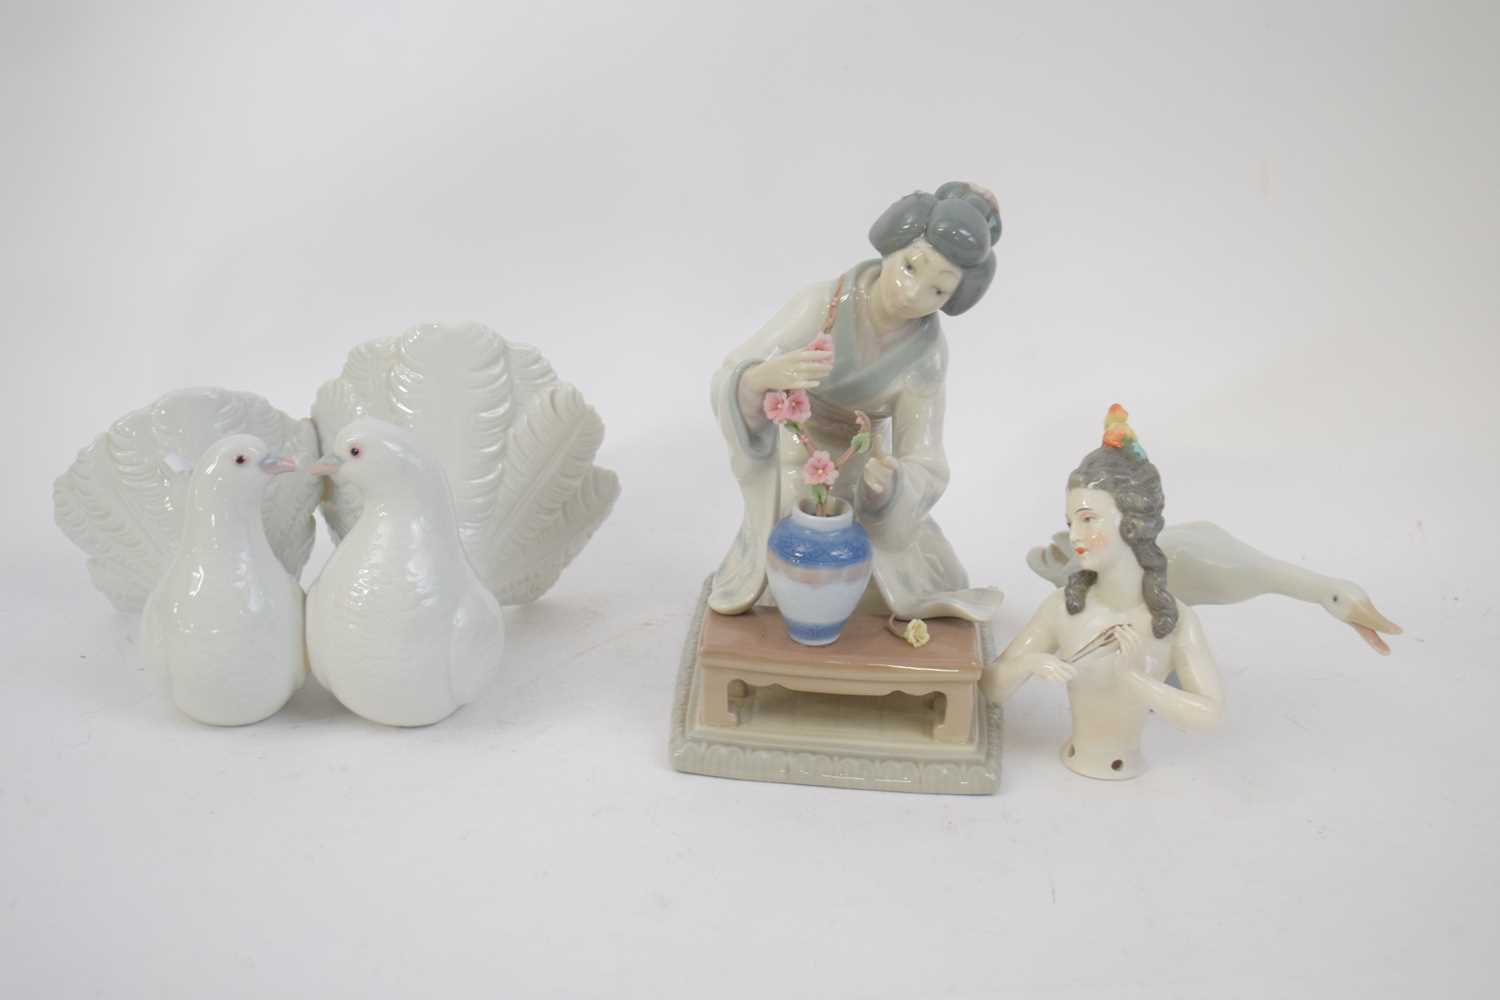 Pair of Lladro doves, also Lladro figure of a Japanese girl arranging flowers